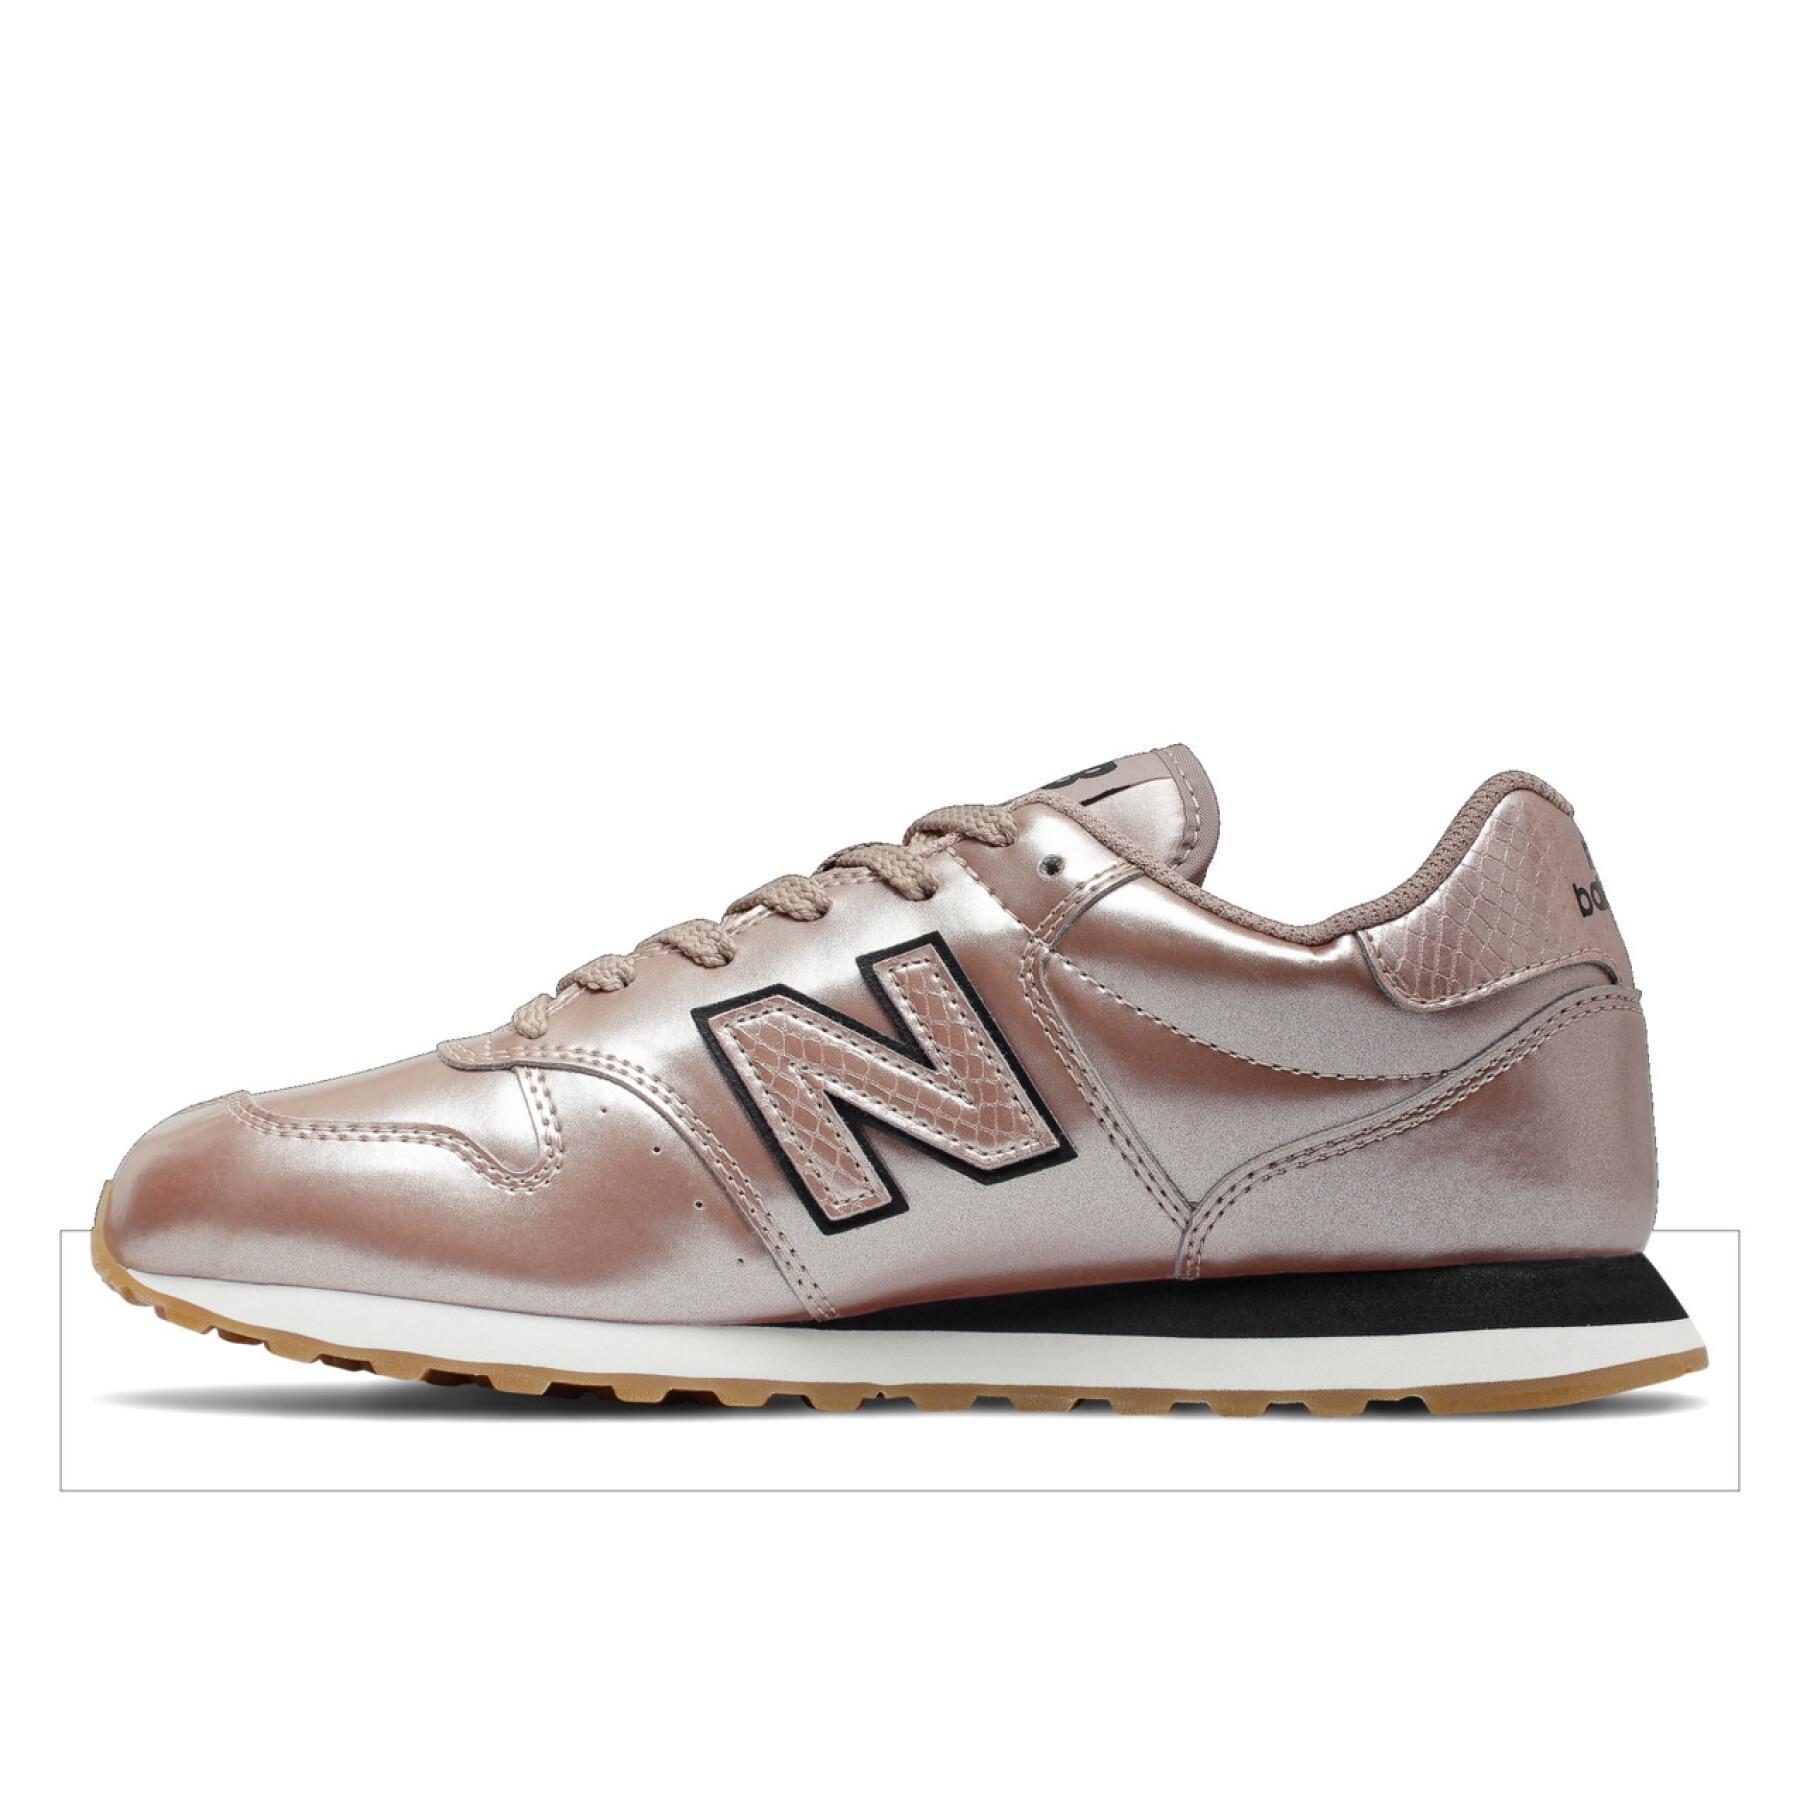 Chaussures femme New Balance 500 classic